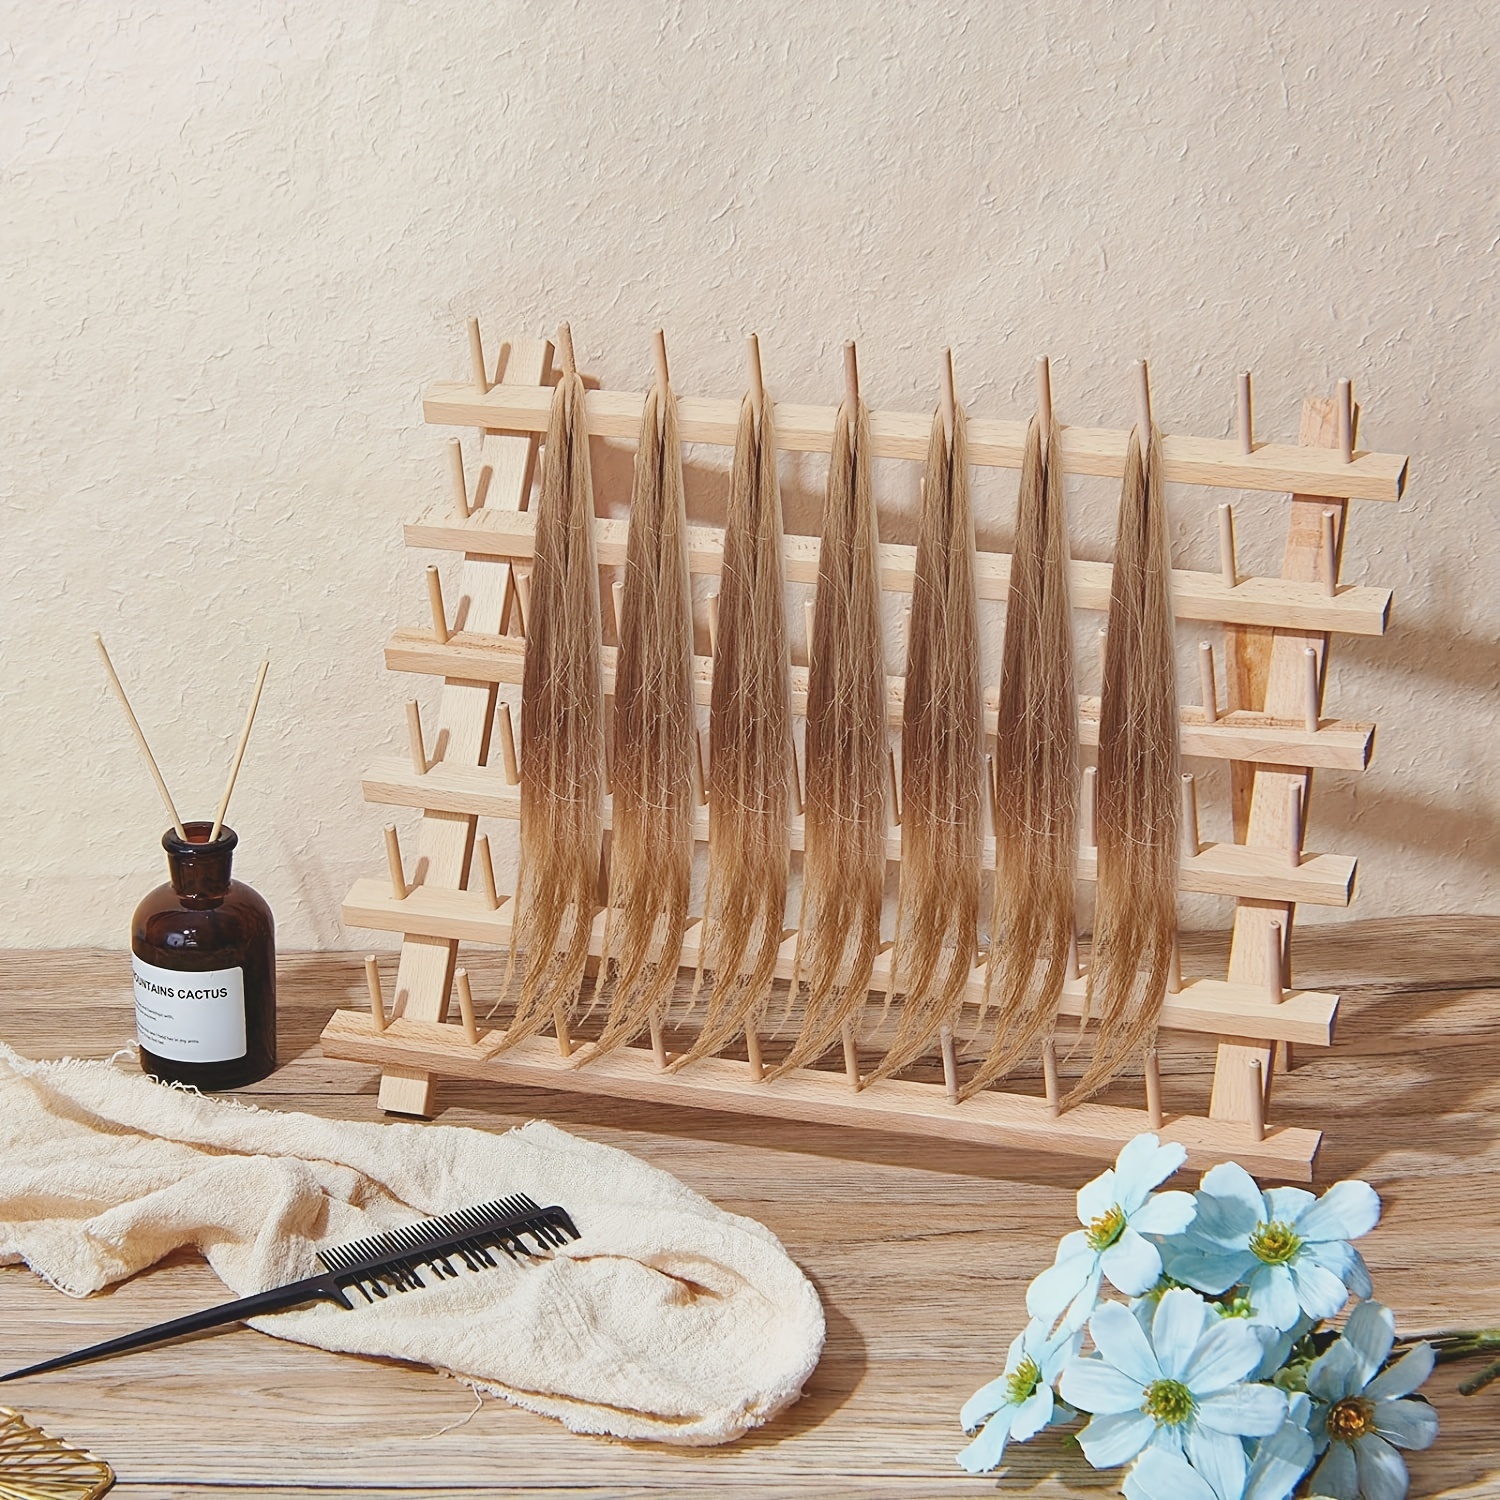 60 Spindle Thread Rack for Spools